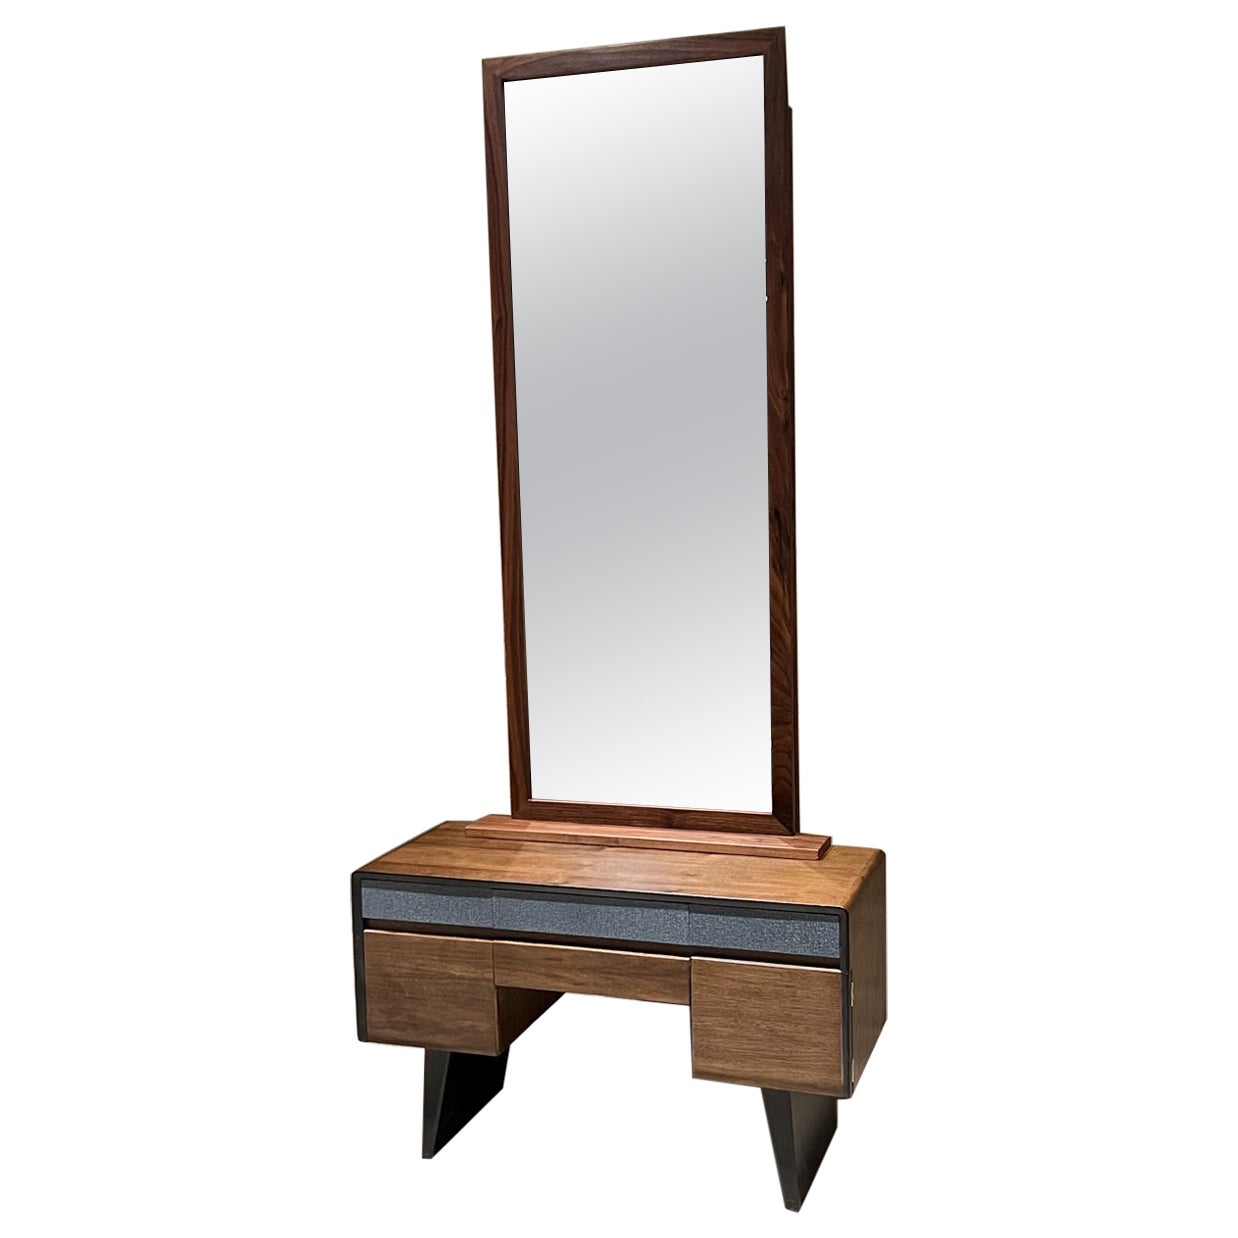 1960s Modern Vanity Set Dressing Table with Mirror For Sale